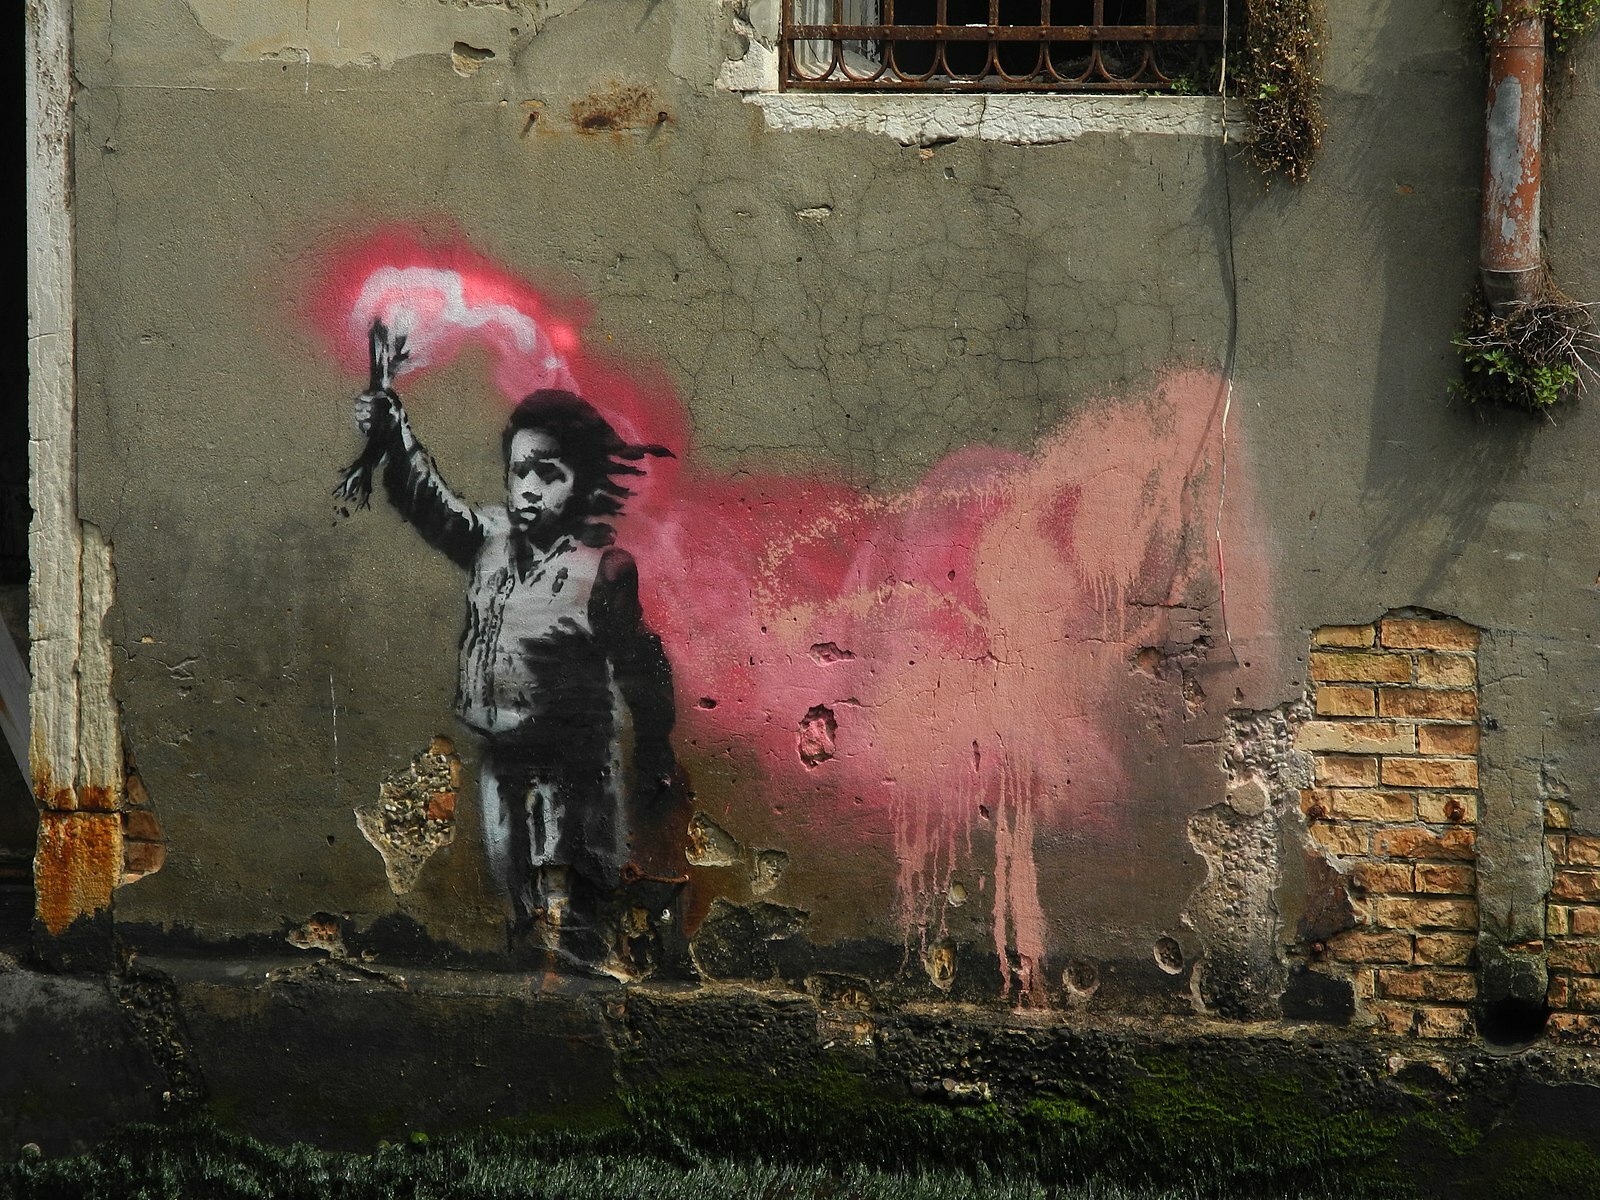 Banksy Genius Or Vandal Catch The Street Artist S Works In This Exhibition In Bangkok